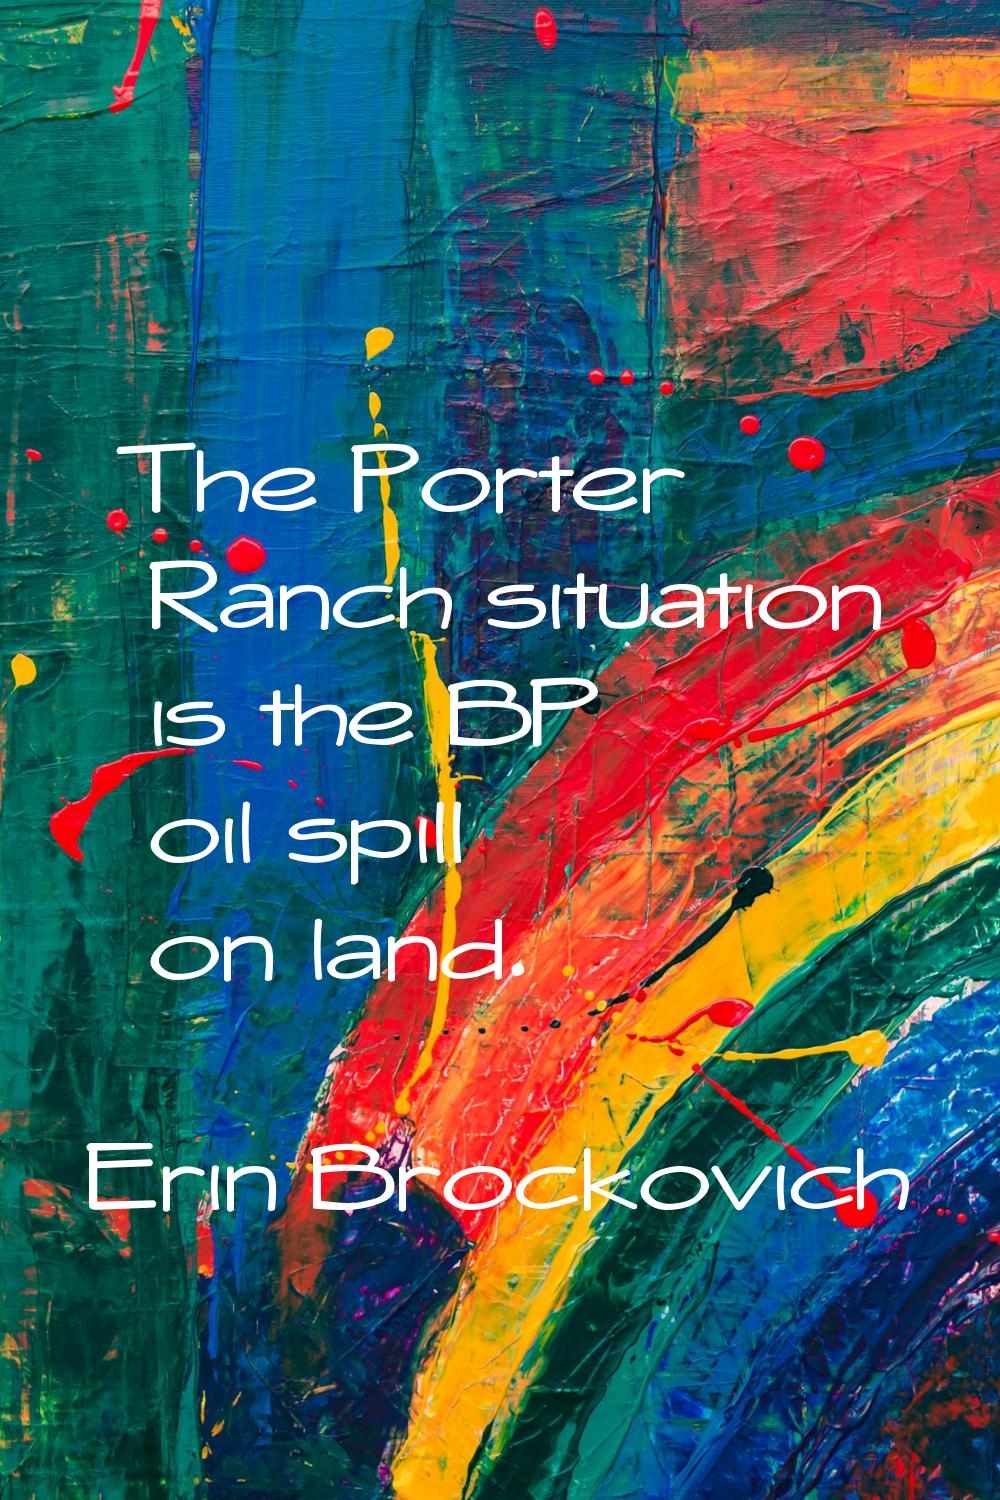 The Porter Ranch situation is the BP oil spill on land.